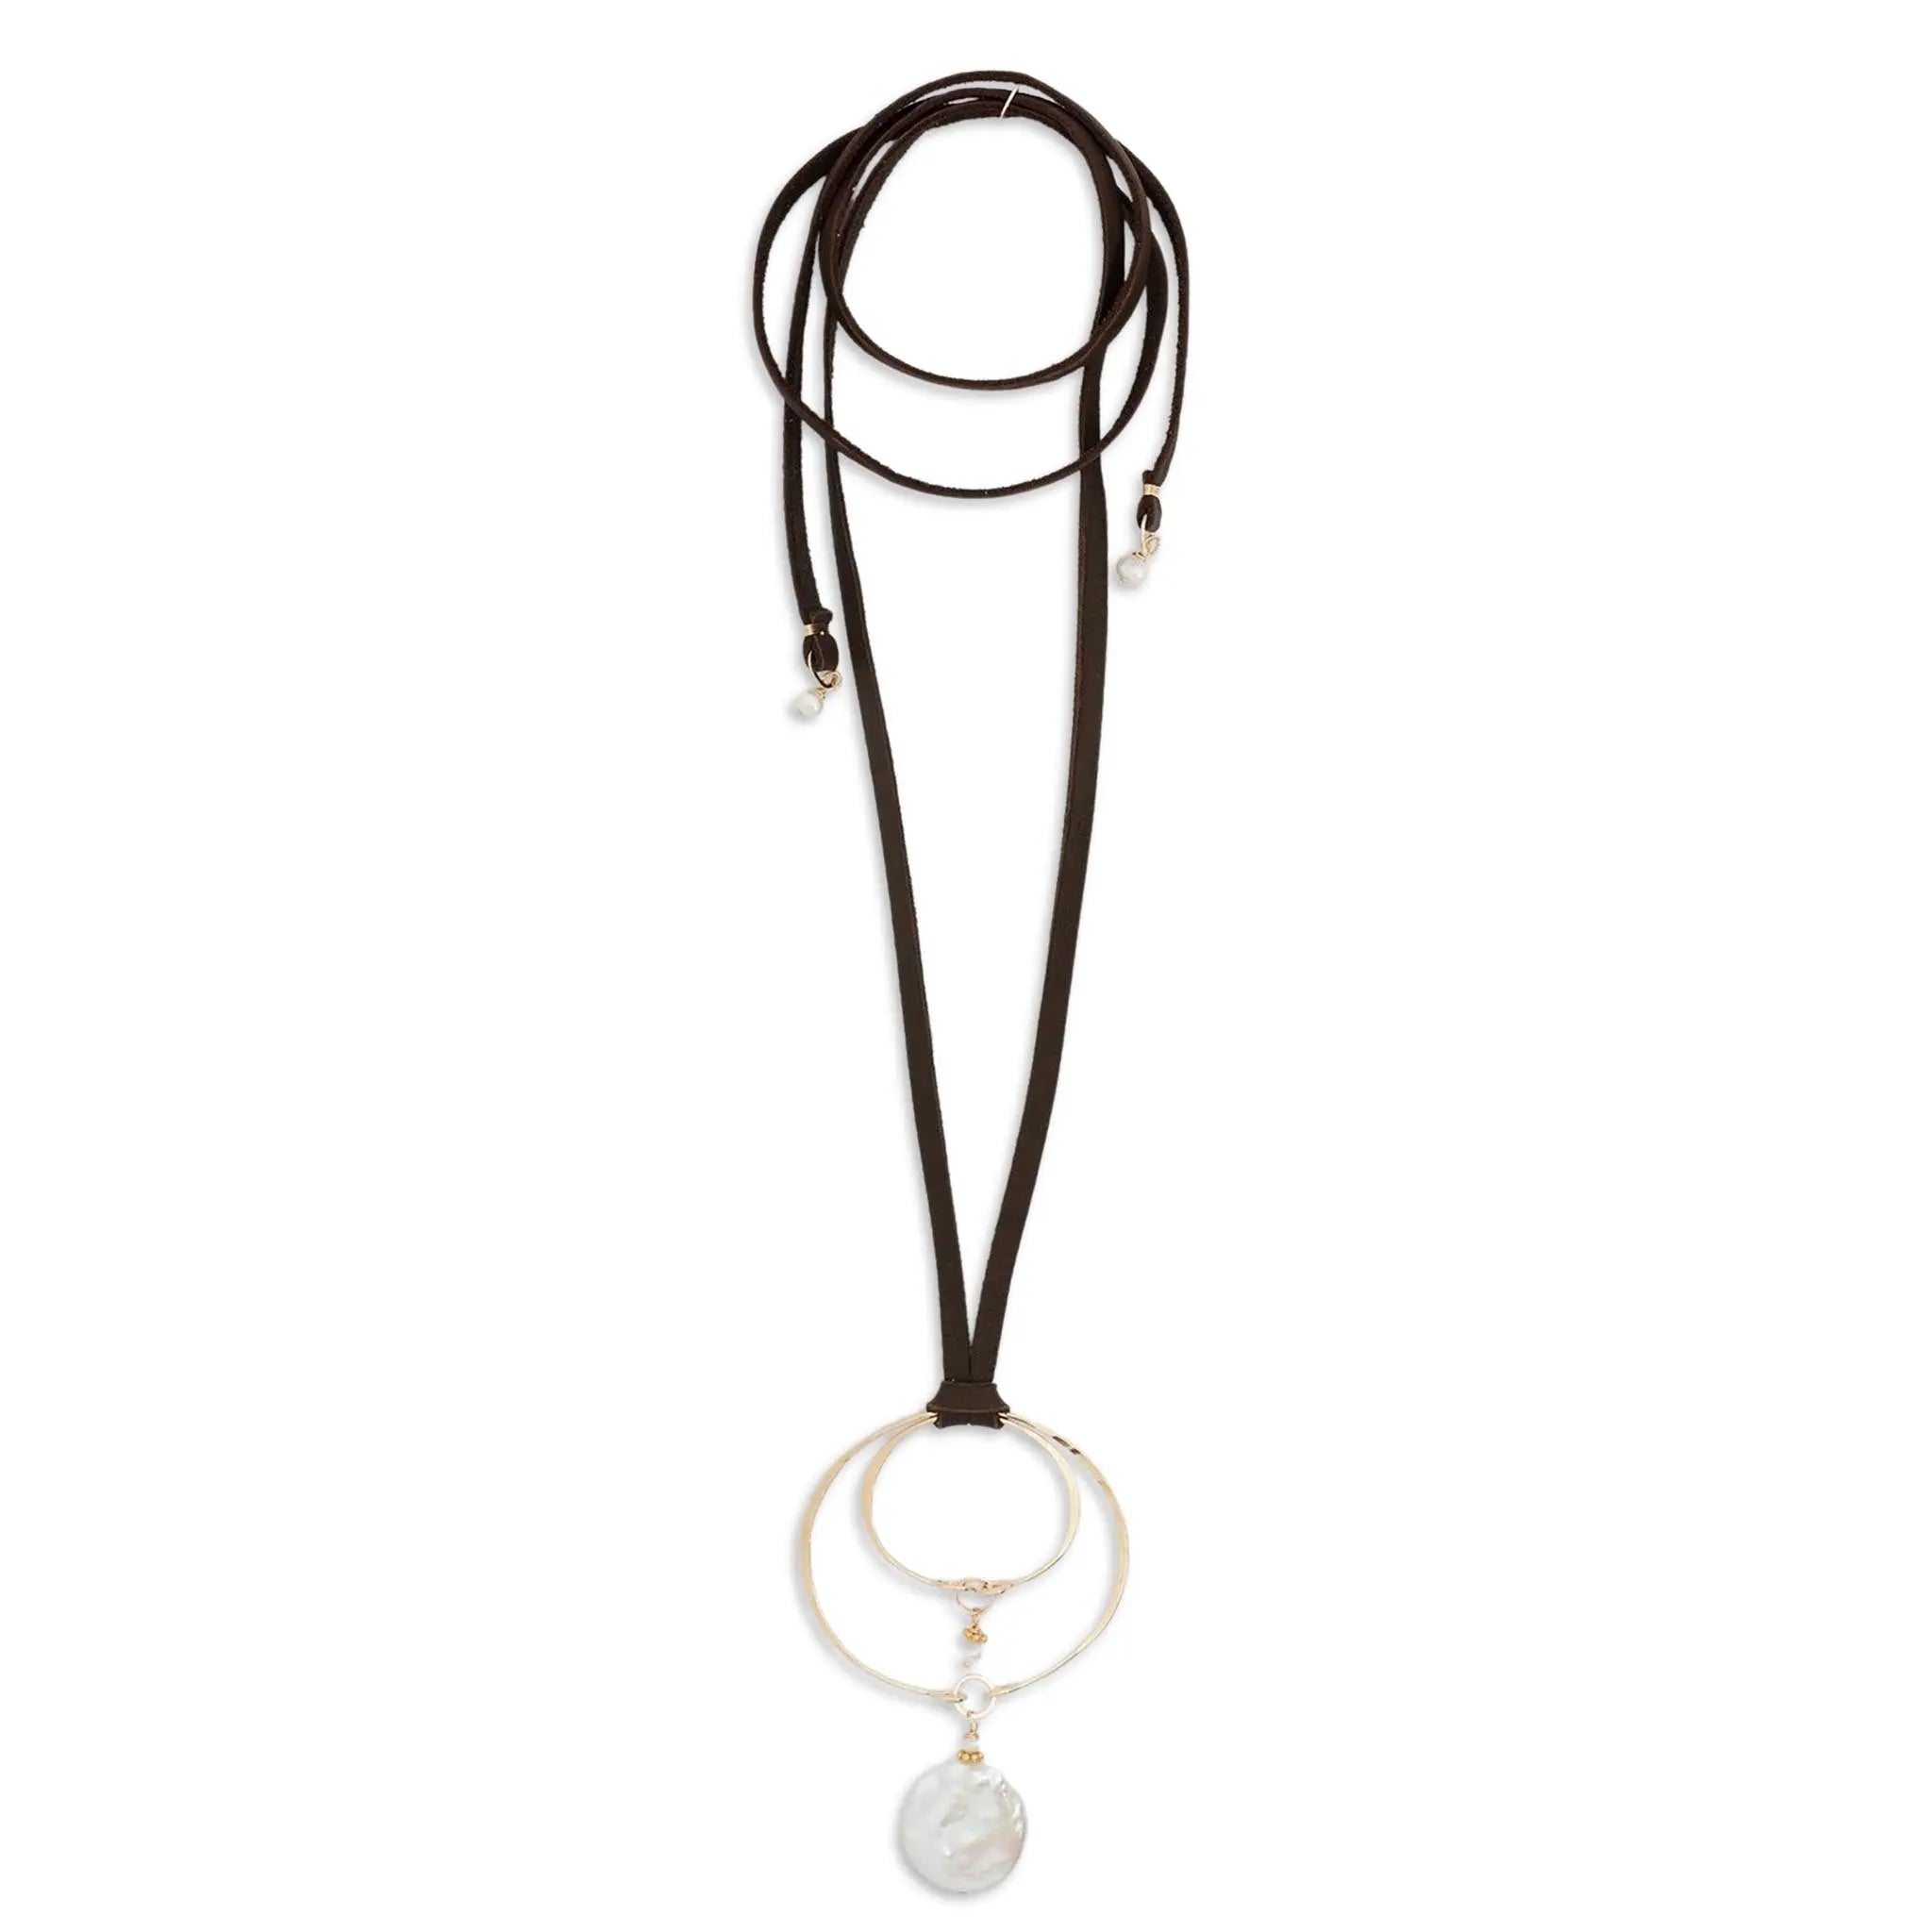 Leather Cord Necklace and Domed Drop Pendant - Milor